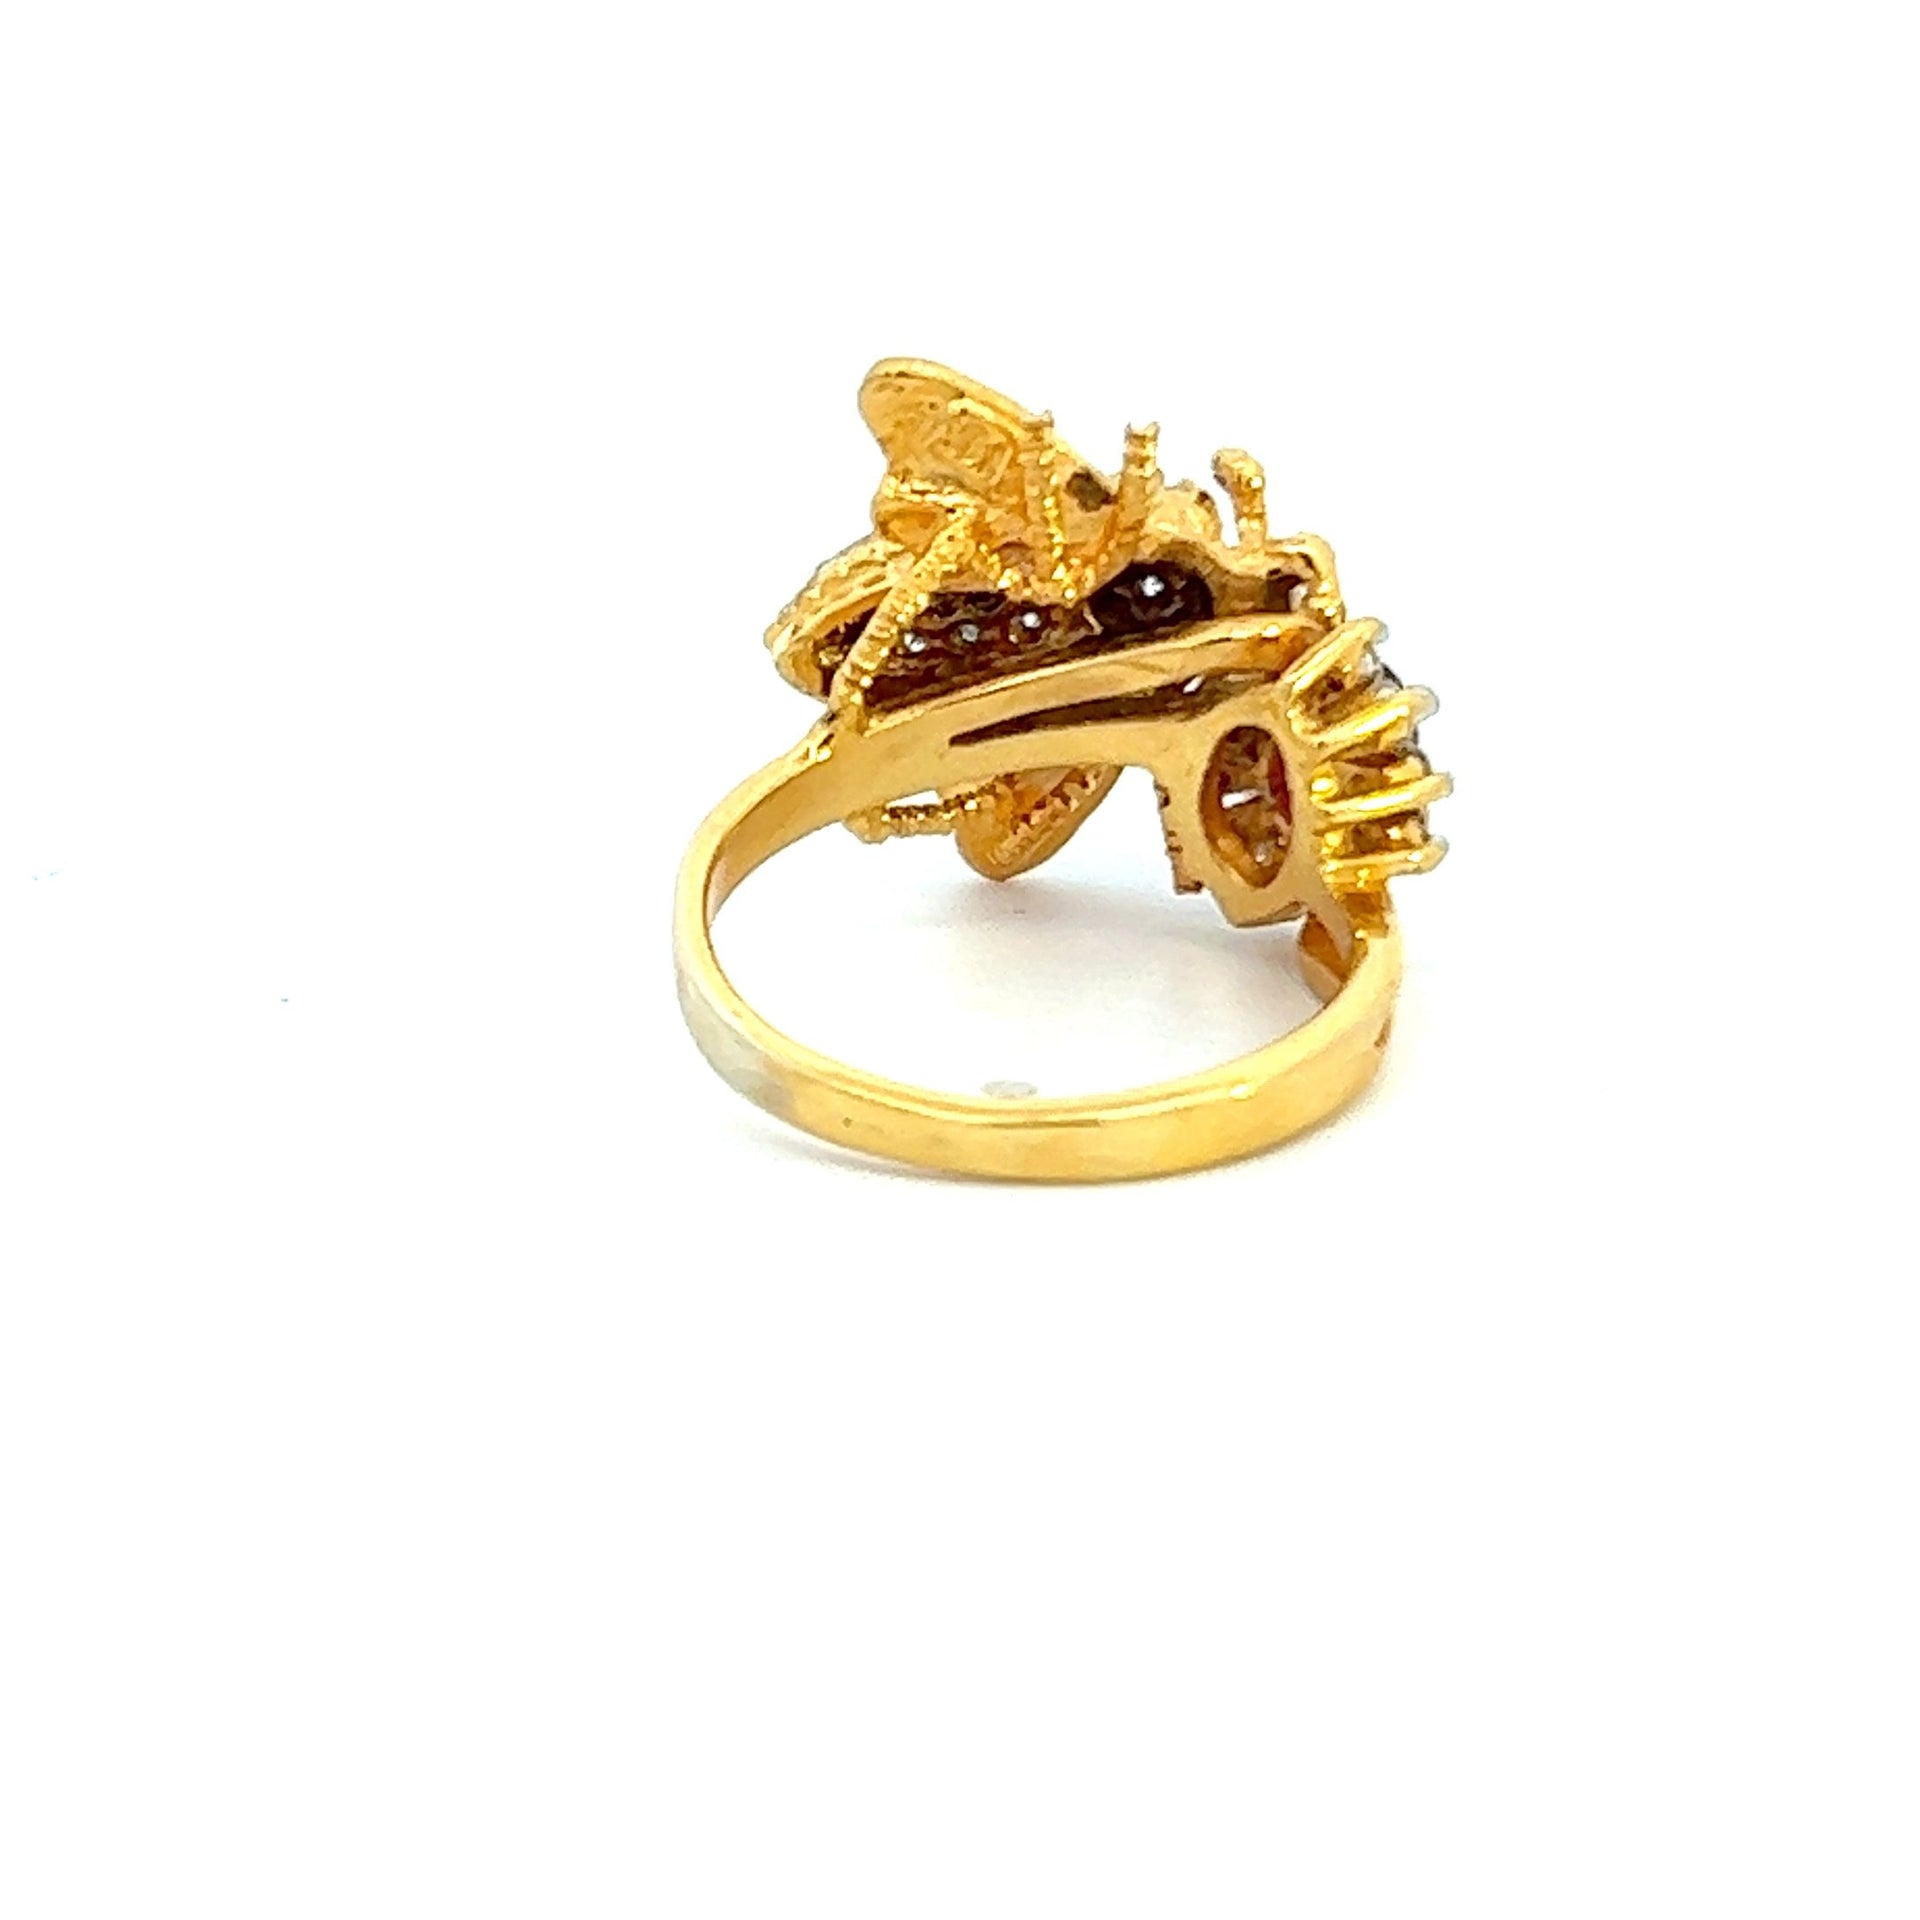 VINTAGE 18KT RUBY AND DIAMOND BEE RING